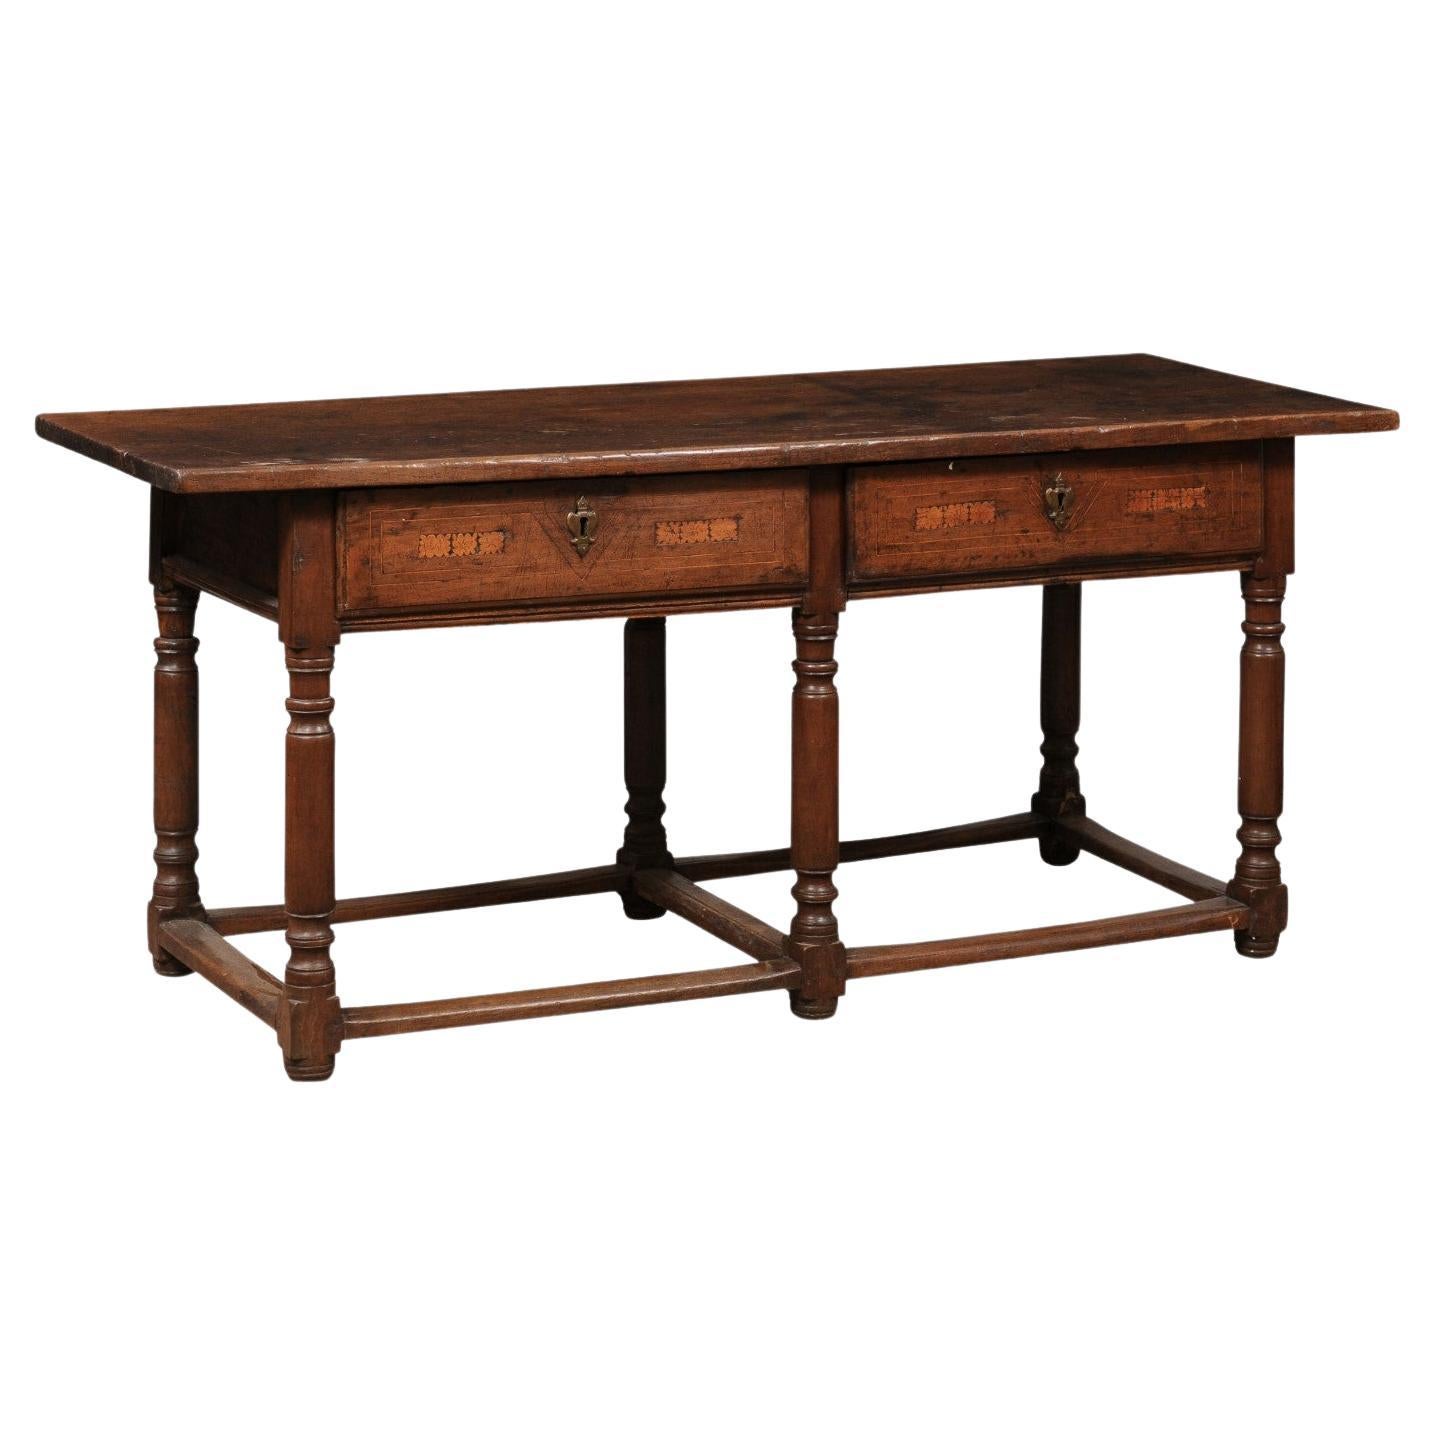  17th Century Italian Refractory Table in Elm with Inlay, 2 Drawers & Turned Leg For Sale